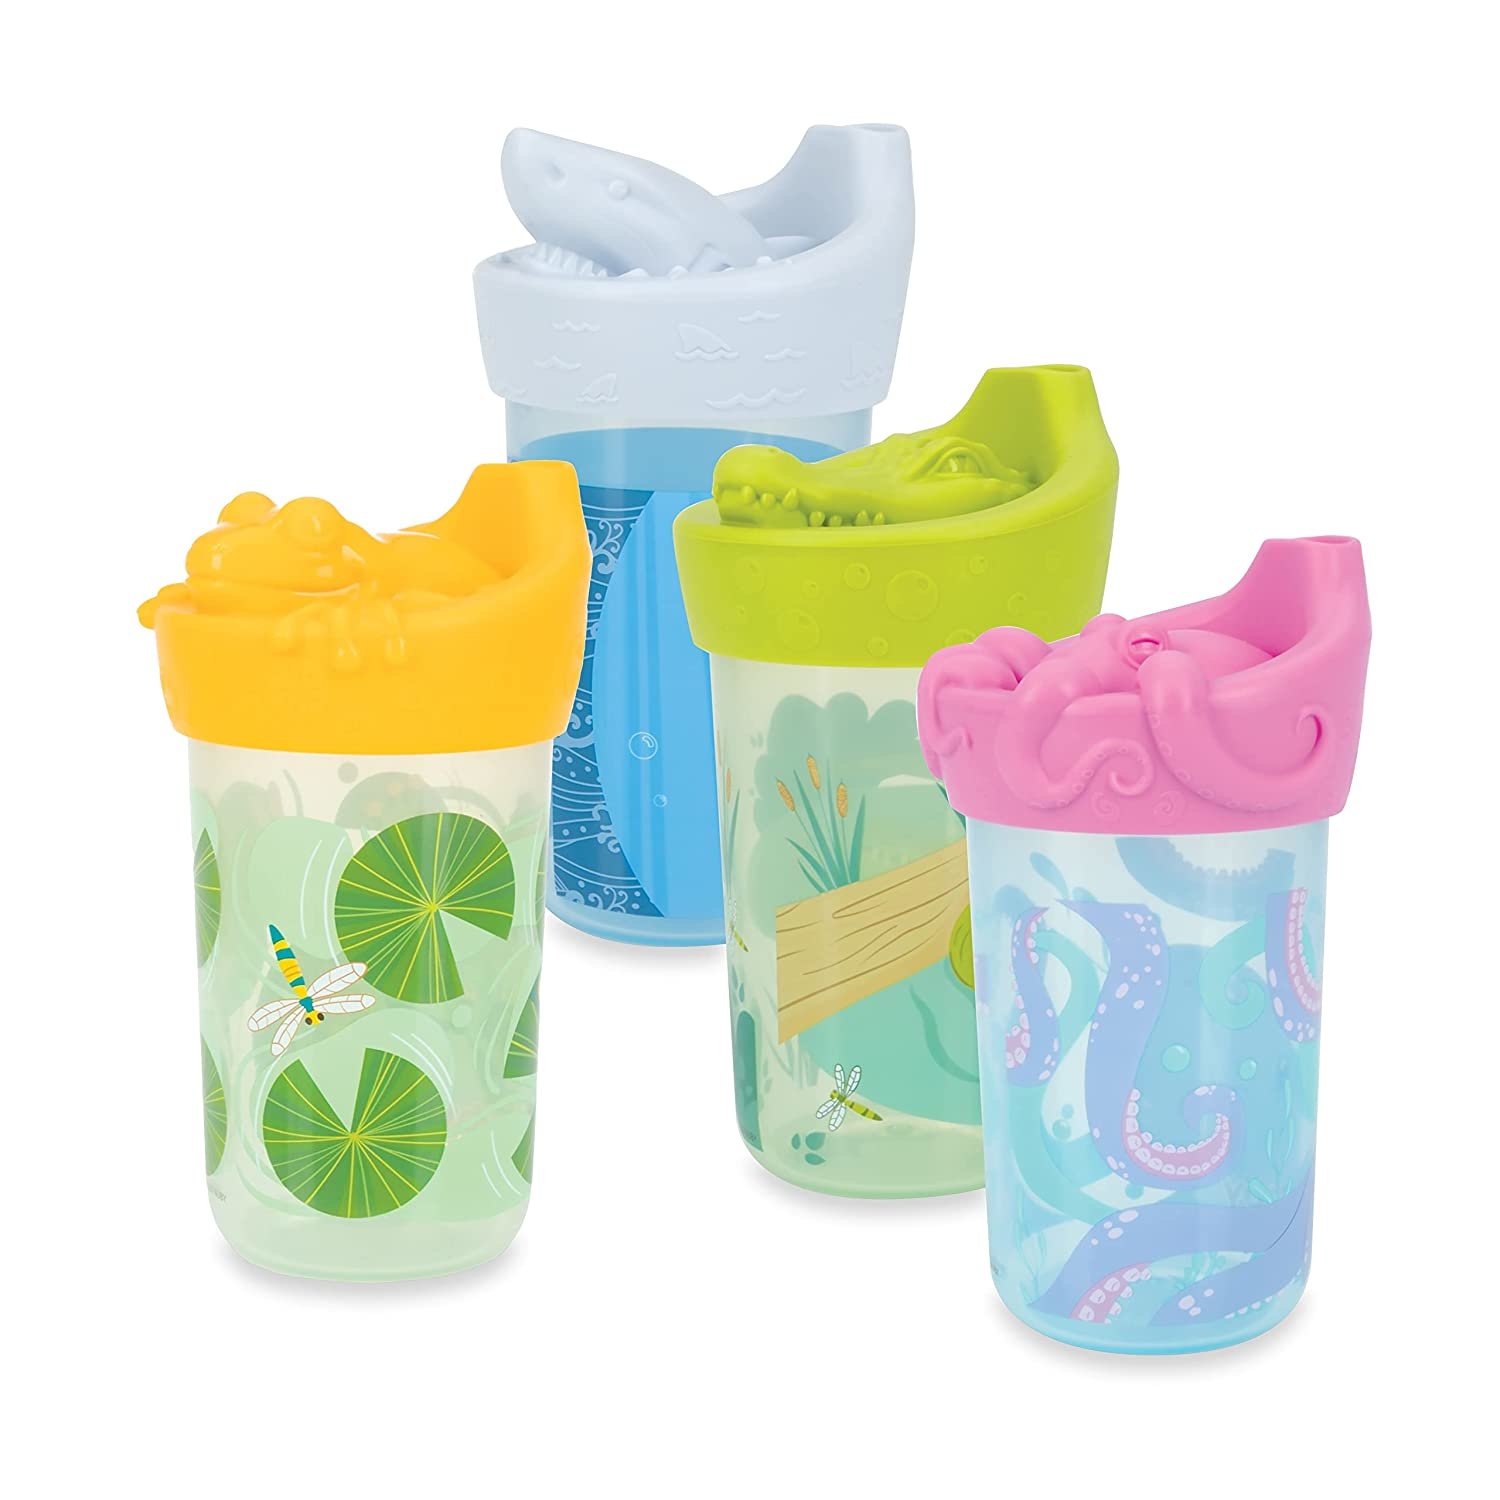 Nuby 3D No Spill Character Sippy Cup with Silicone Top (bpa free)